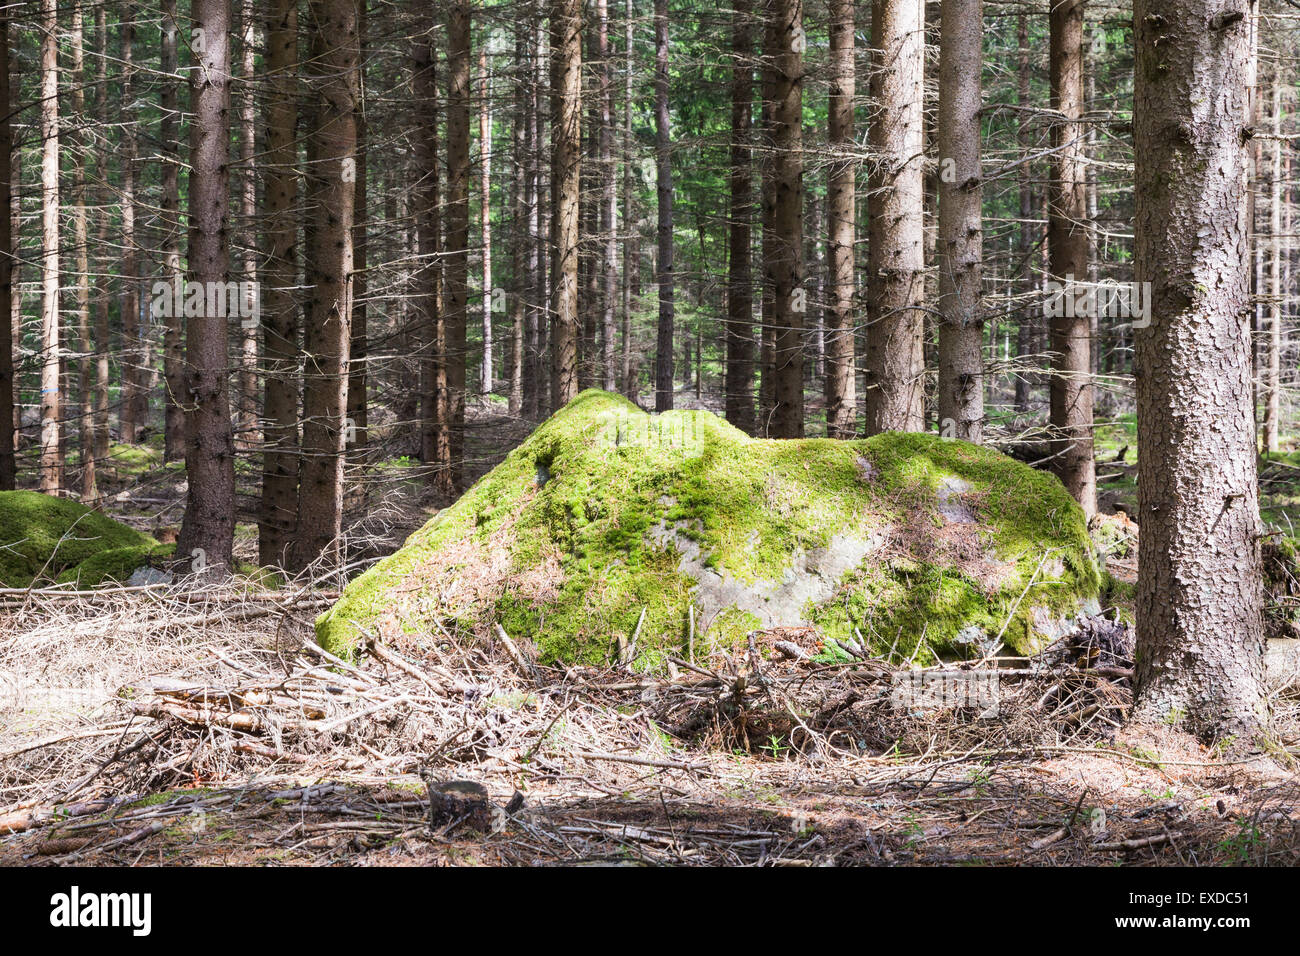 Giant Overgrown Boulder with Moss on Top in Pine Forest Stock Photo